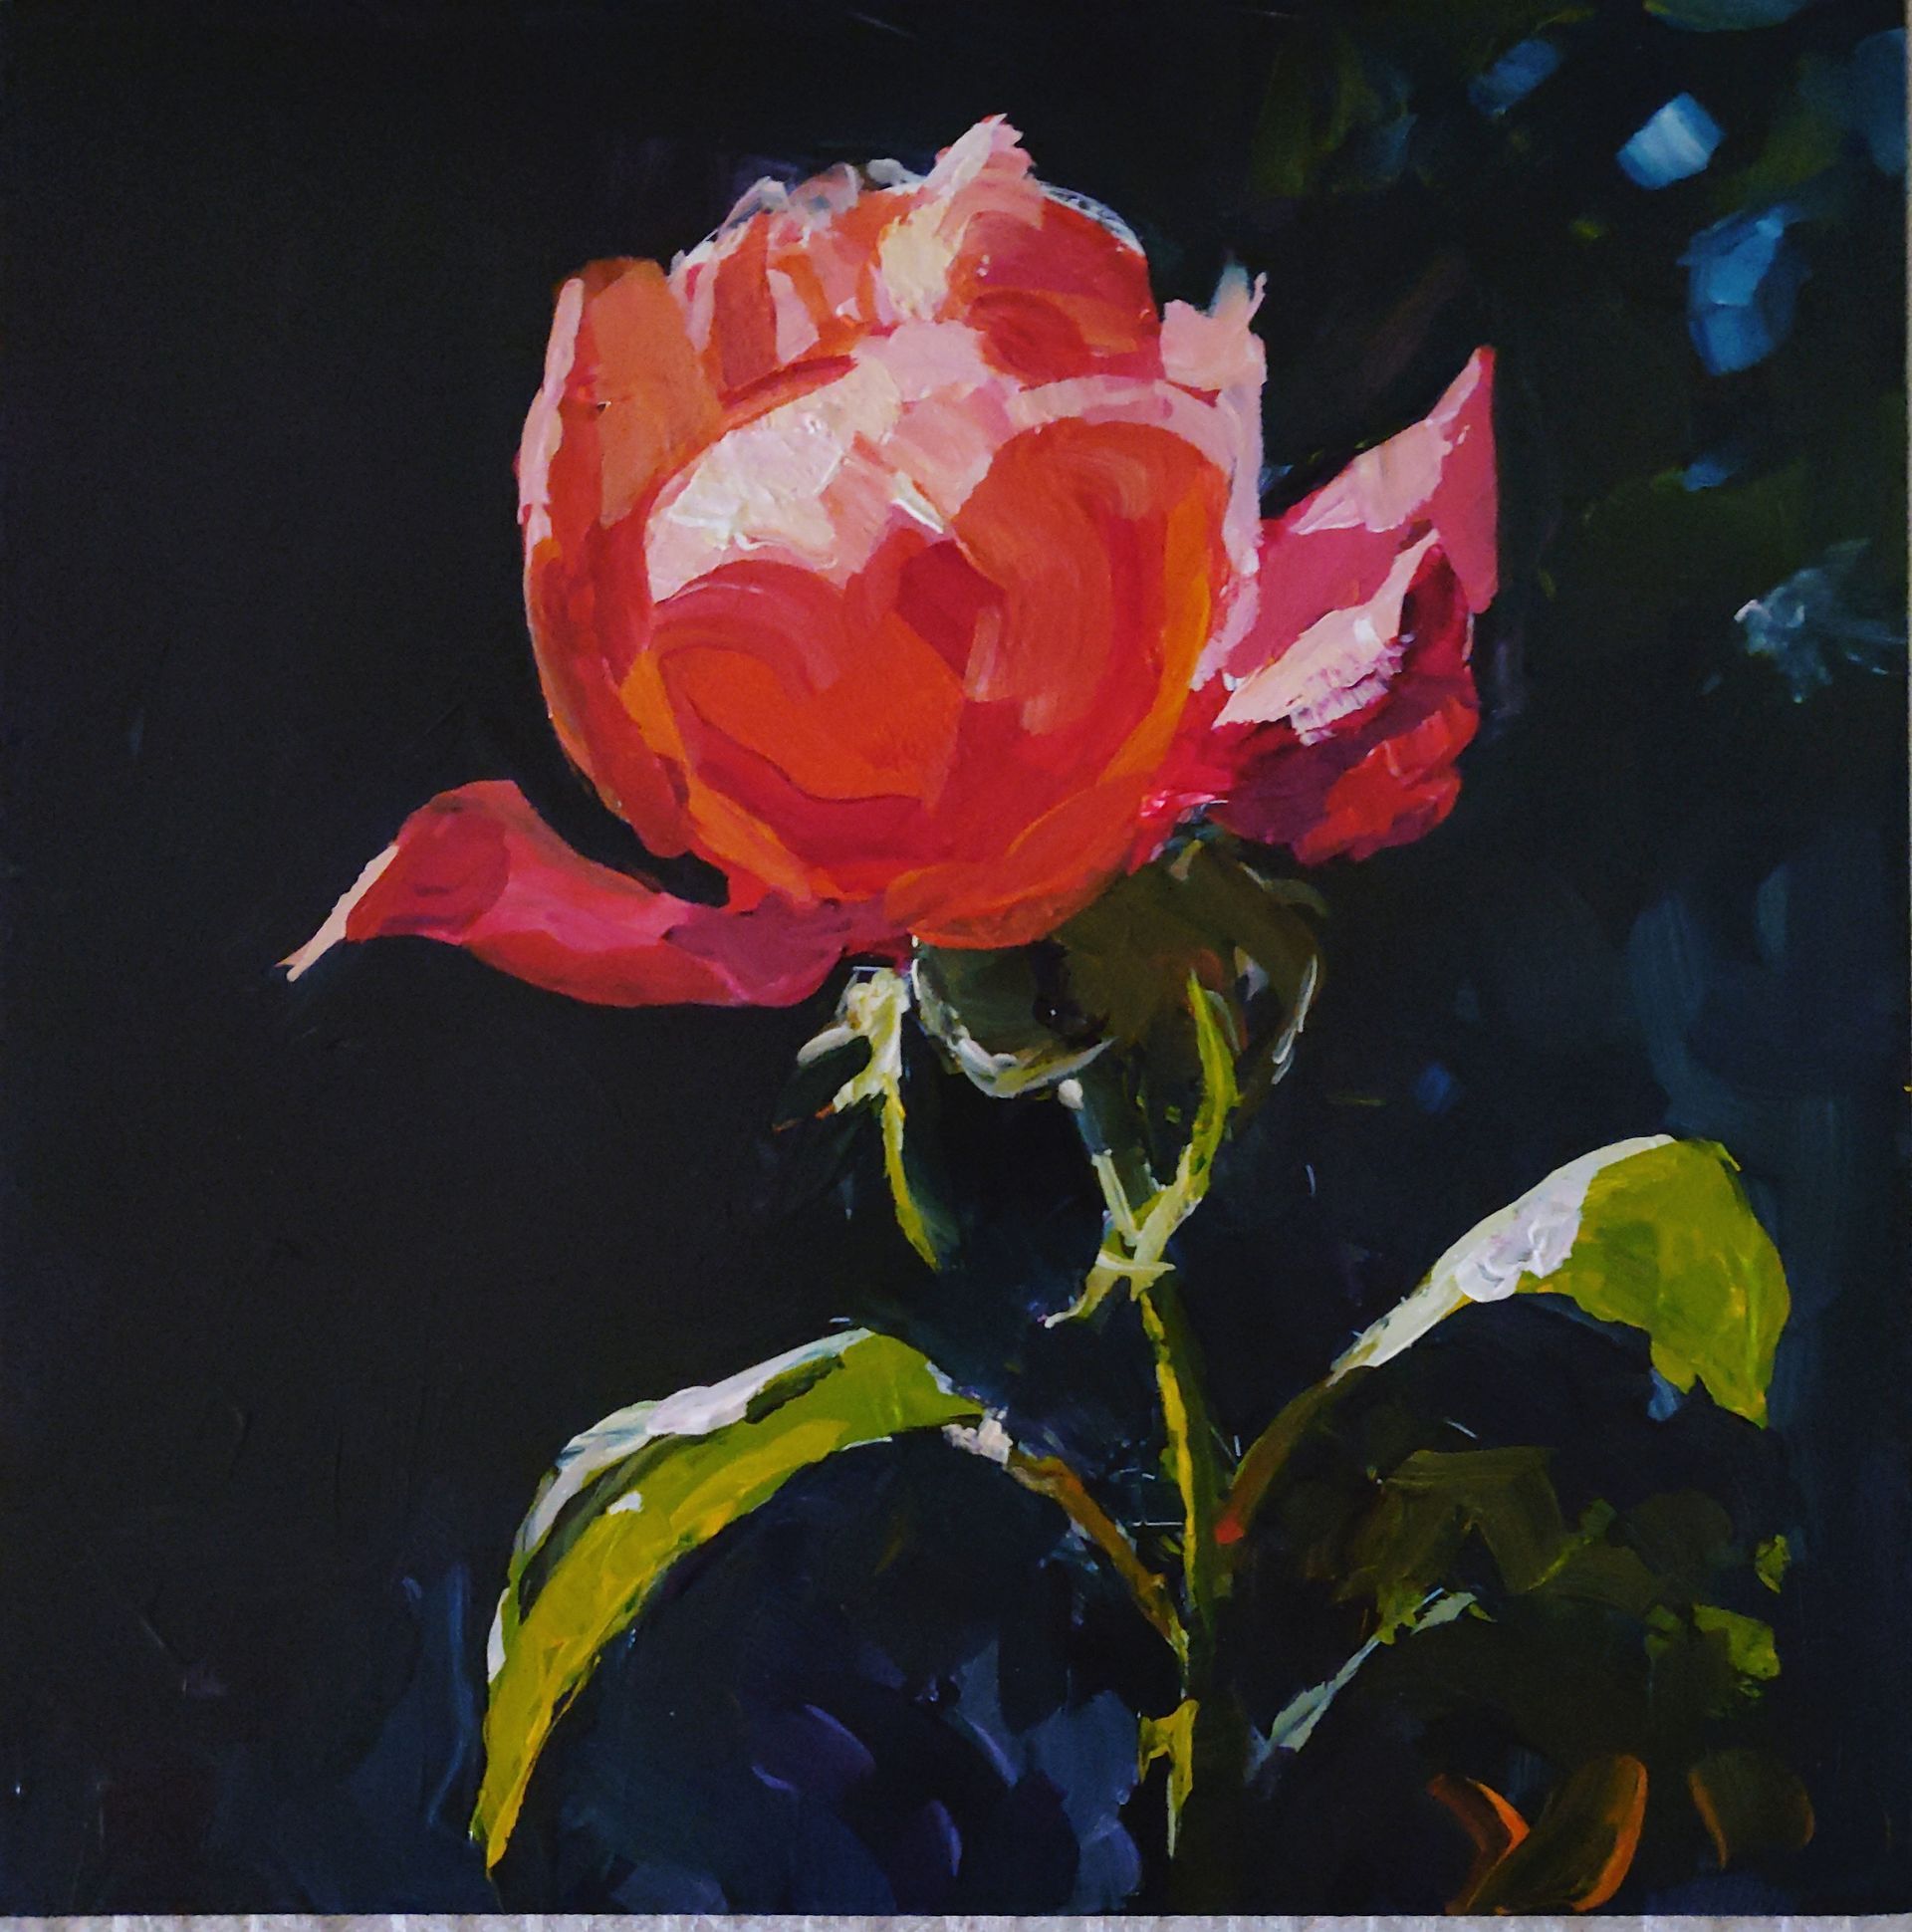 Dianna Shyne - Coral Rose - How To Paint A Rose - Finished Painting